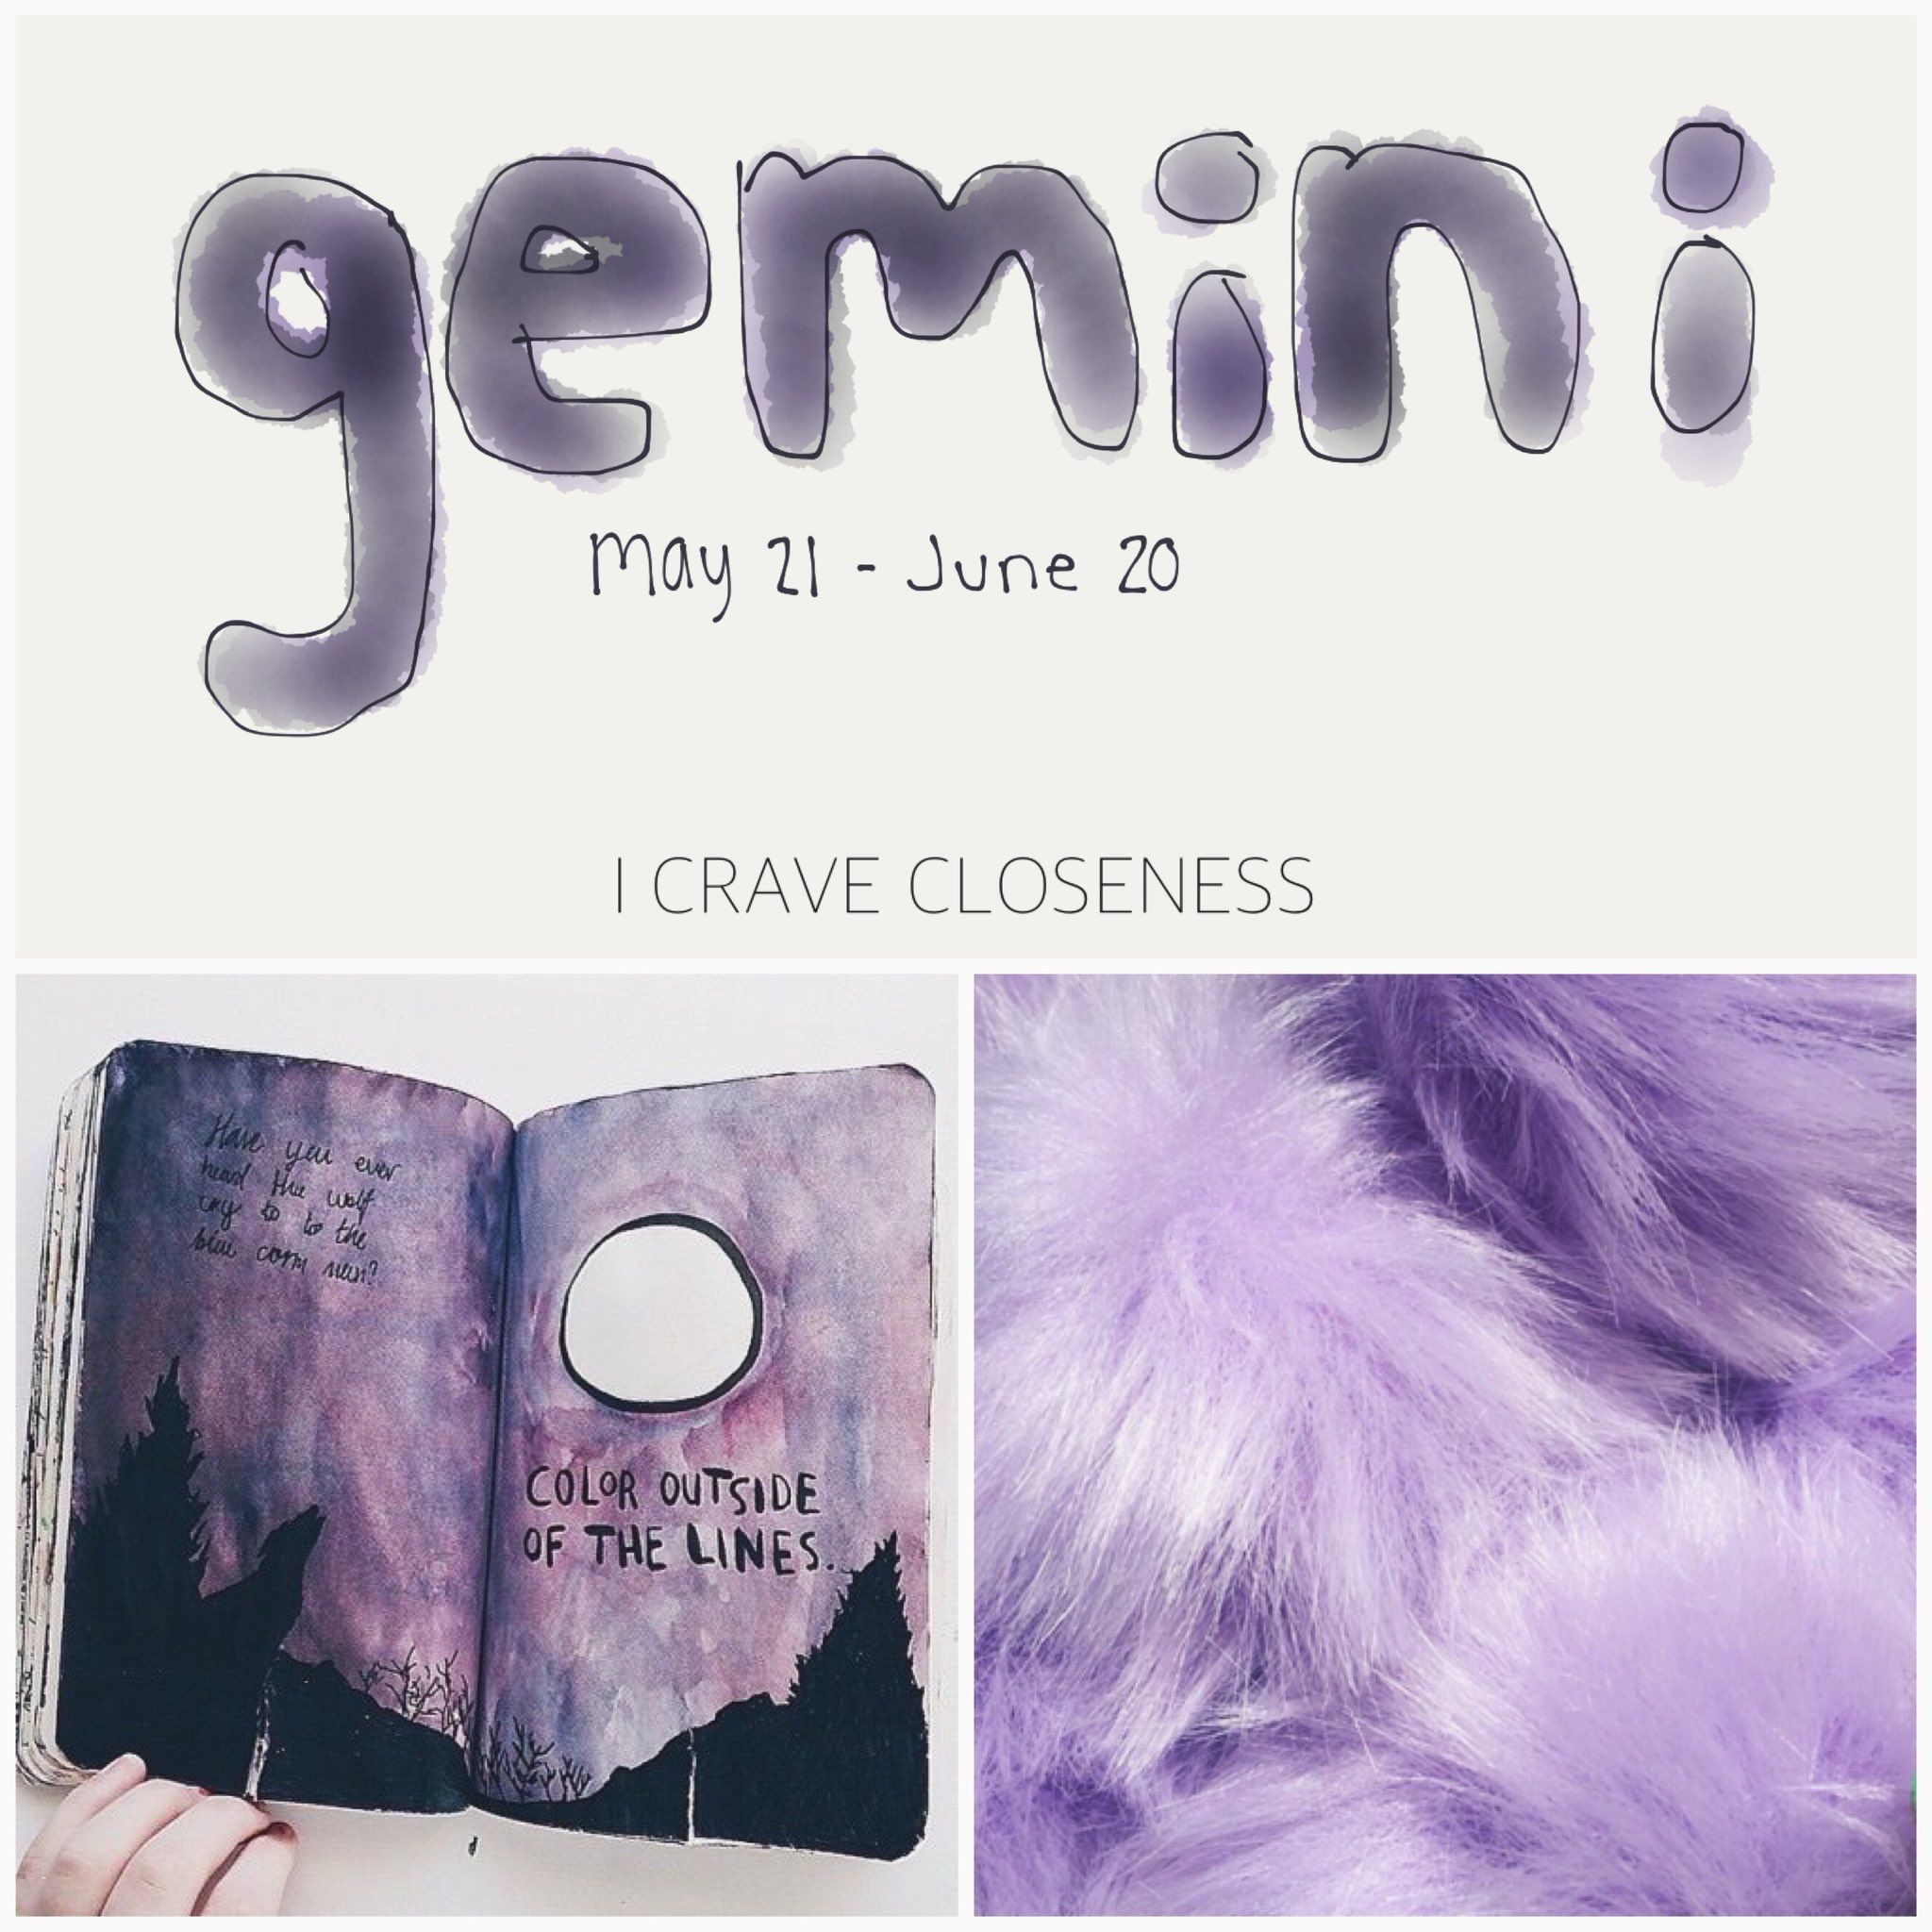 Gemini season is here! This month's theme is all about craving closeness. - Gemini